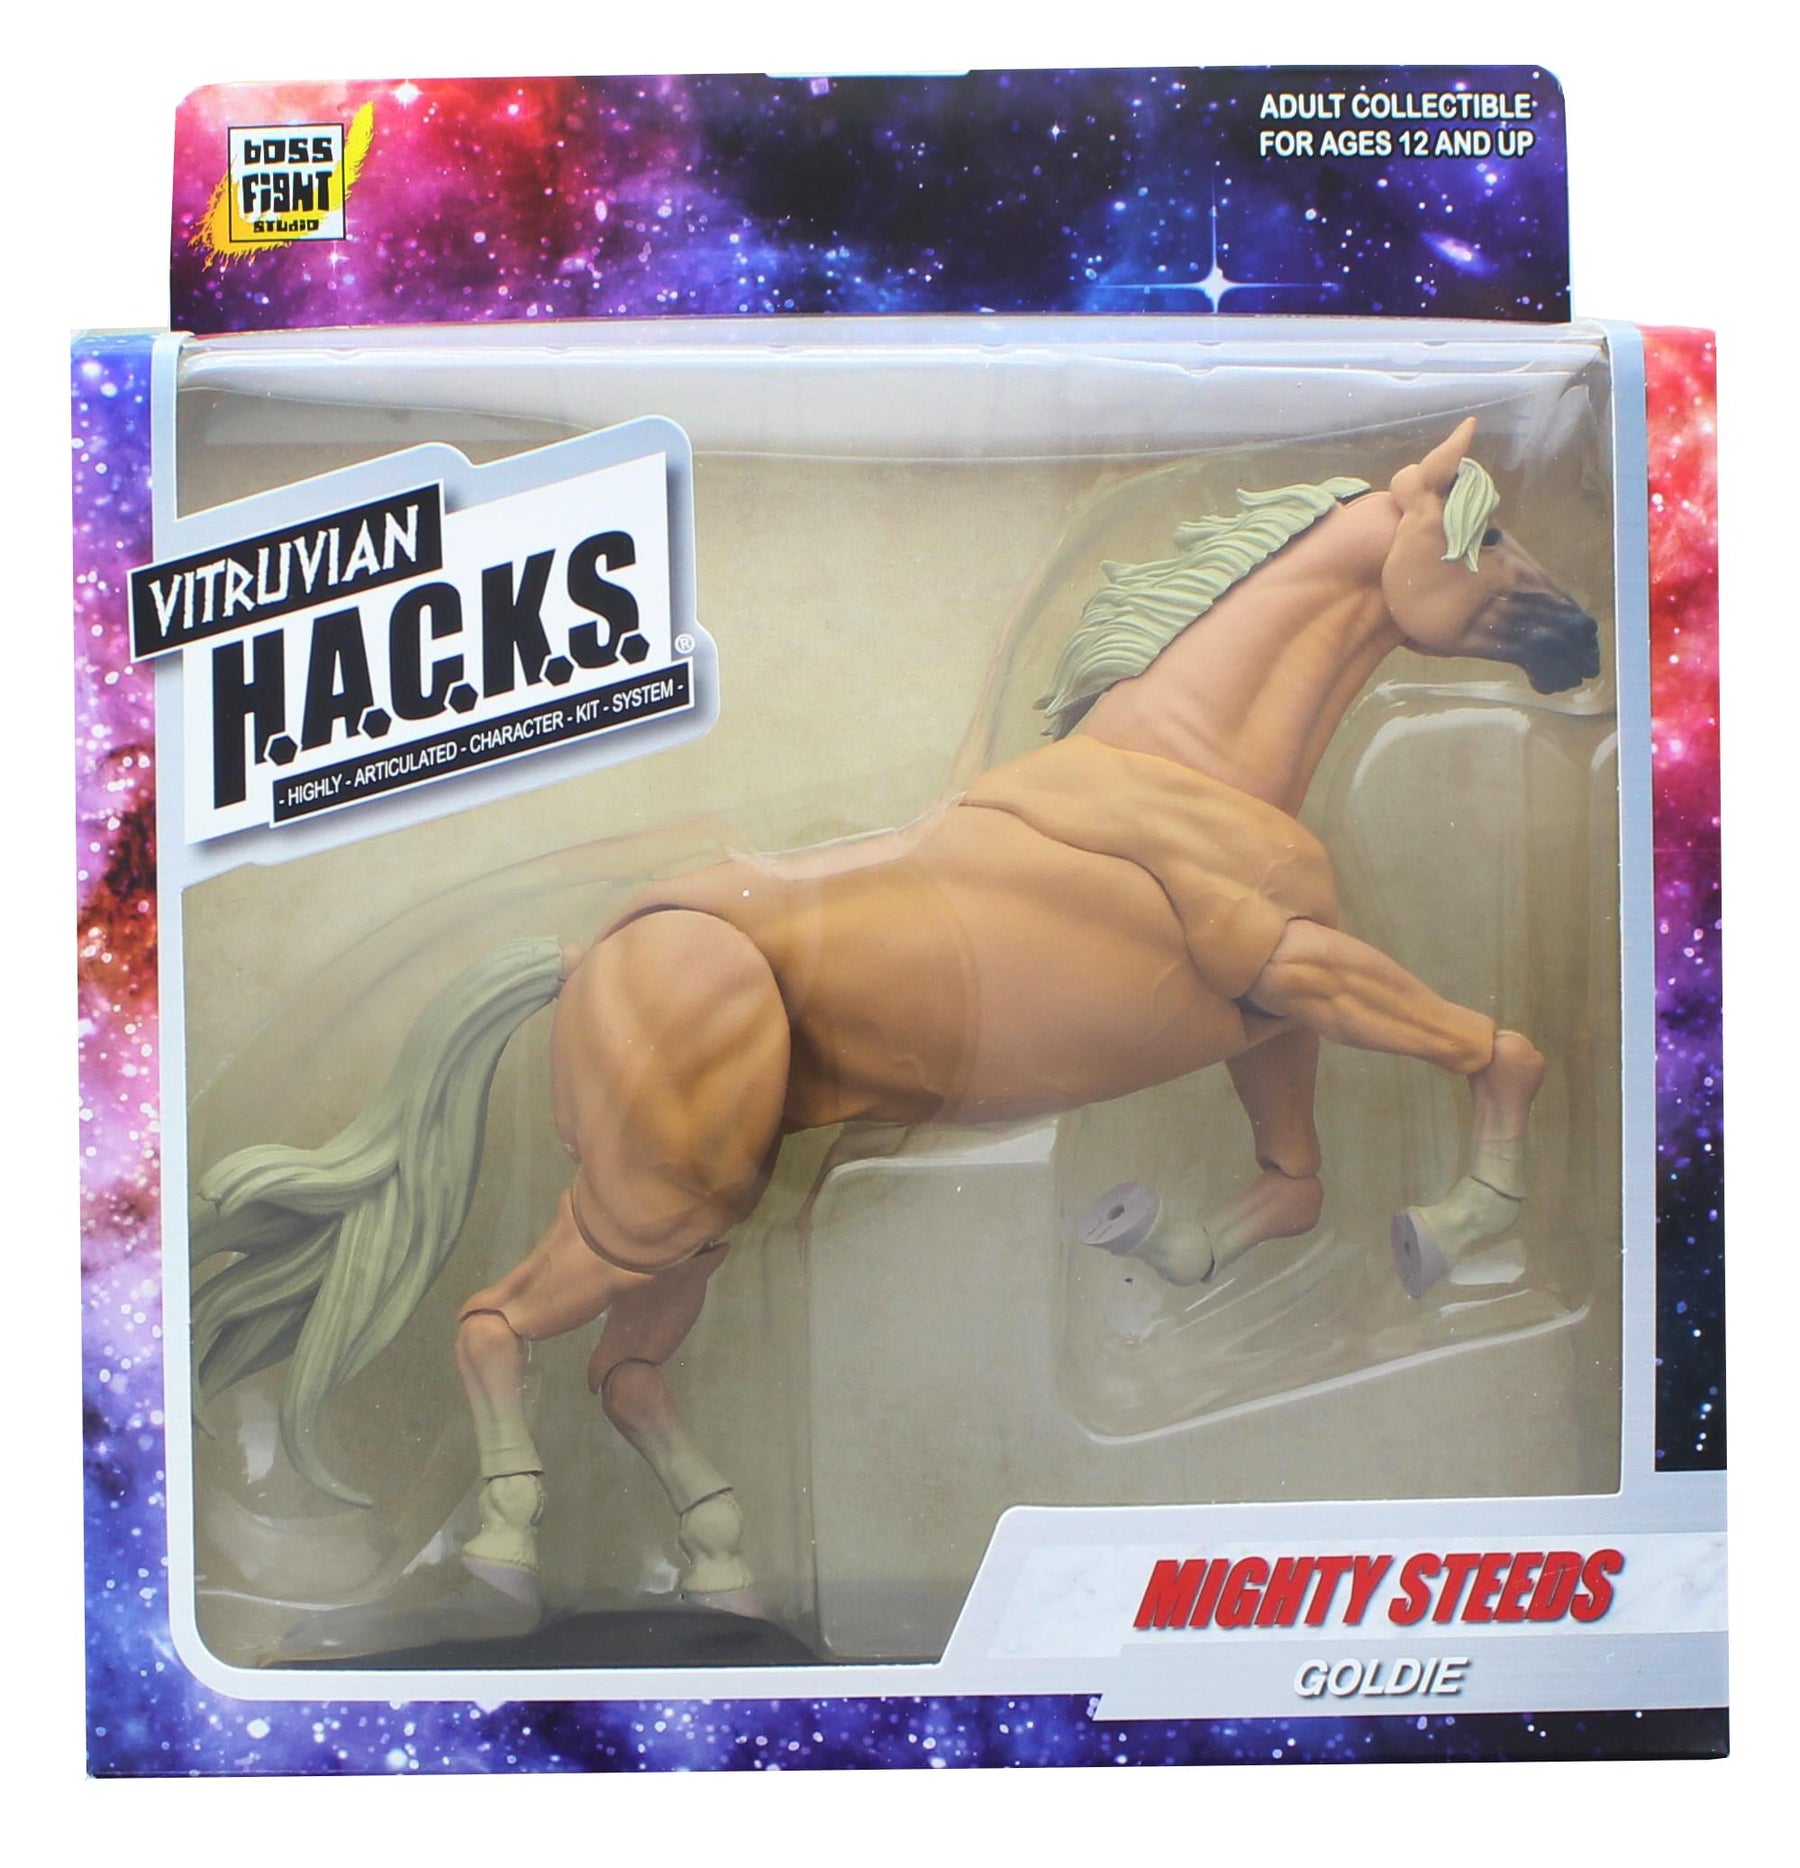 Vitruvian H.A.C.K.S. Mighty Steeds Action Figure Mount | Goldie (Palomino Horse)